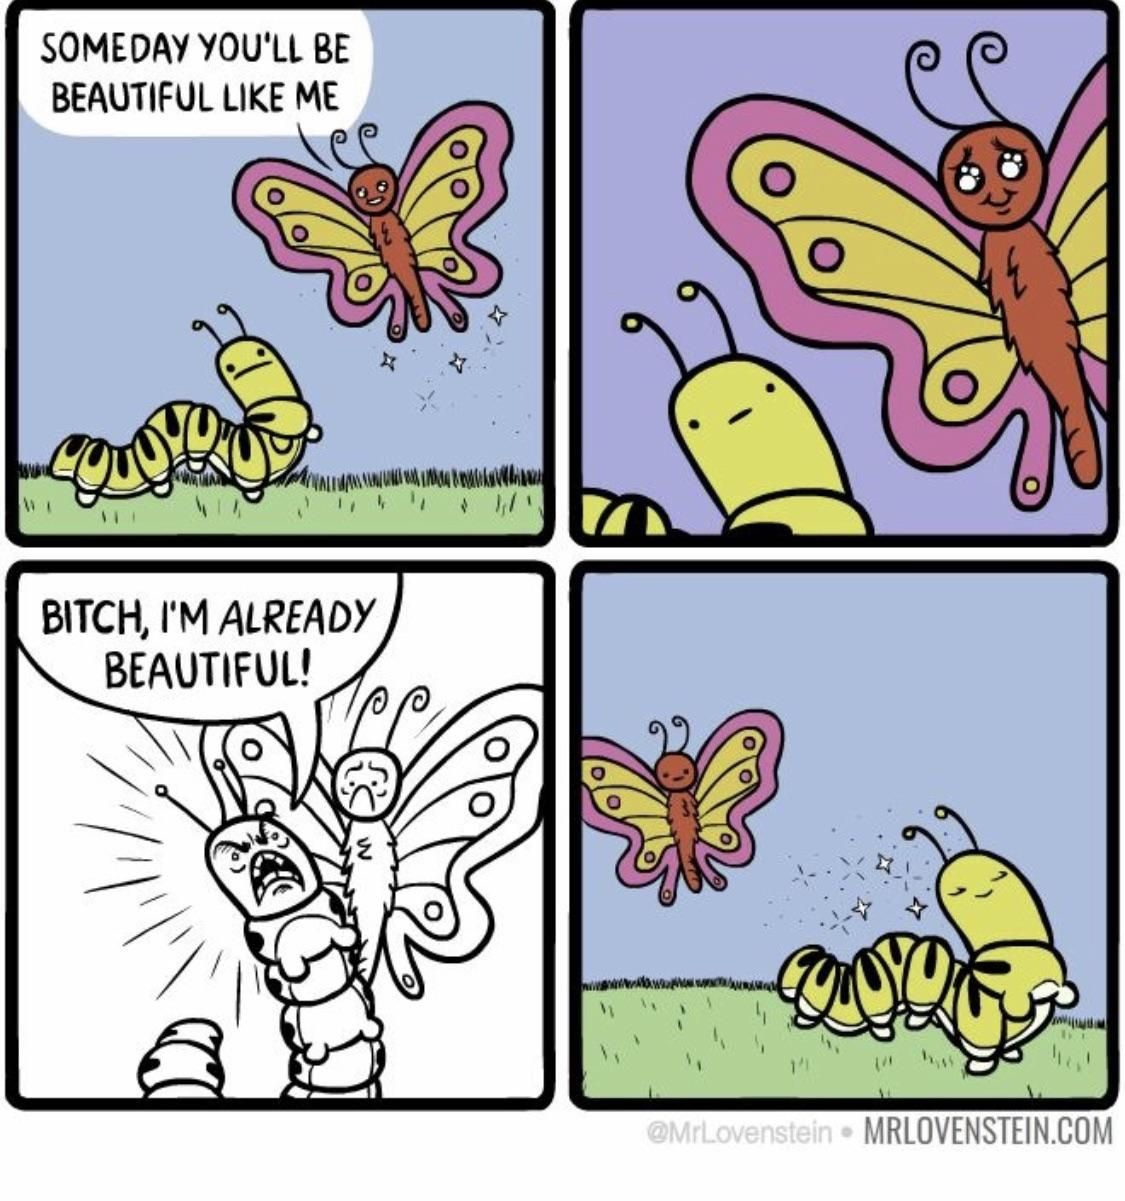 This caterpillar is my new role model